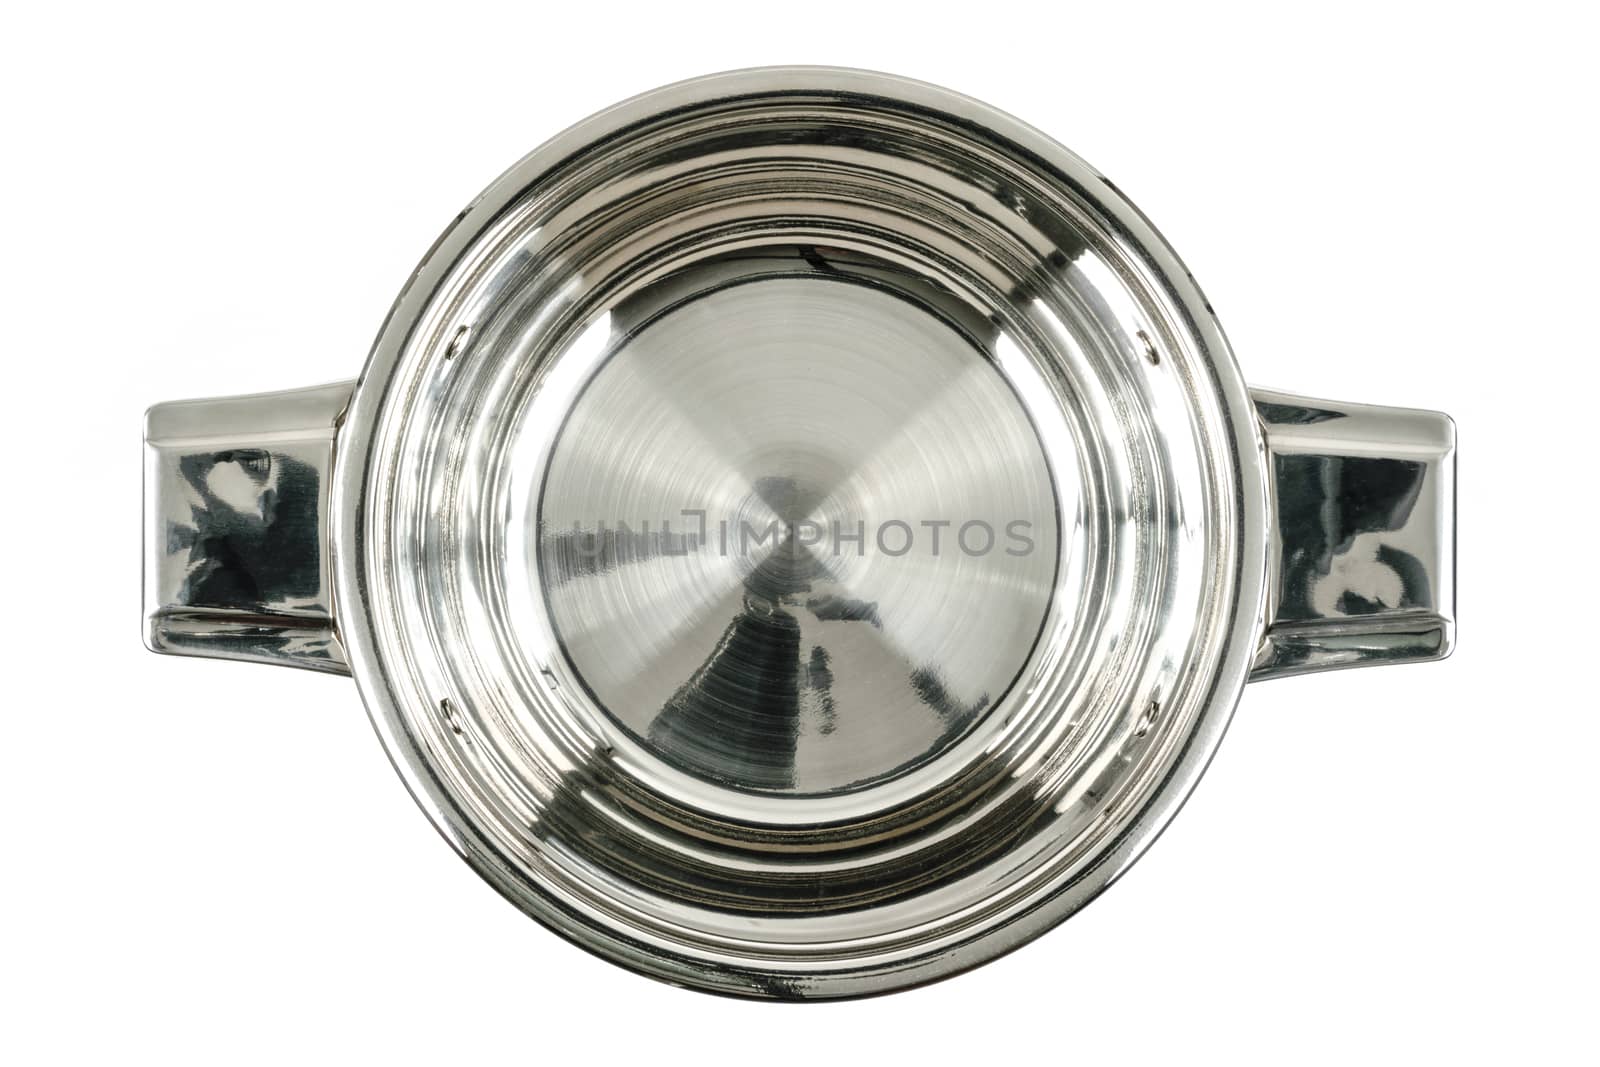 Top view of a professional stainless steel metal cooking pot isolated on a white background.